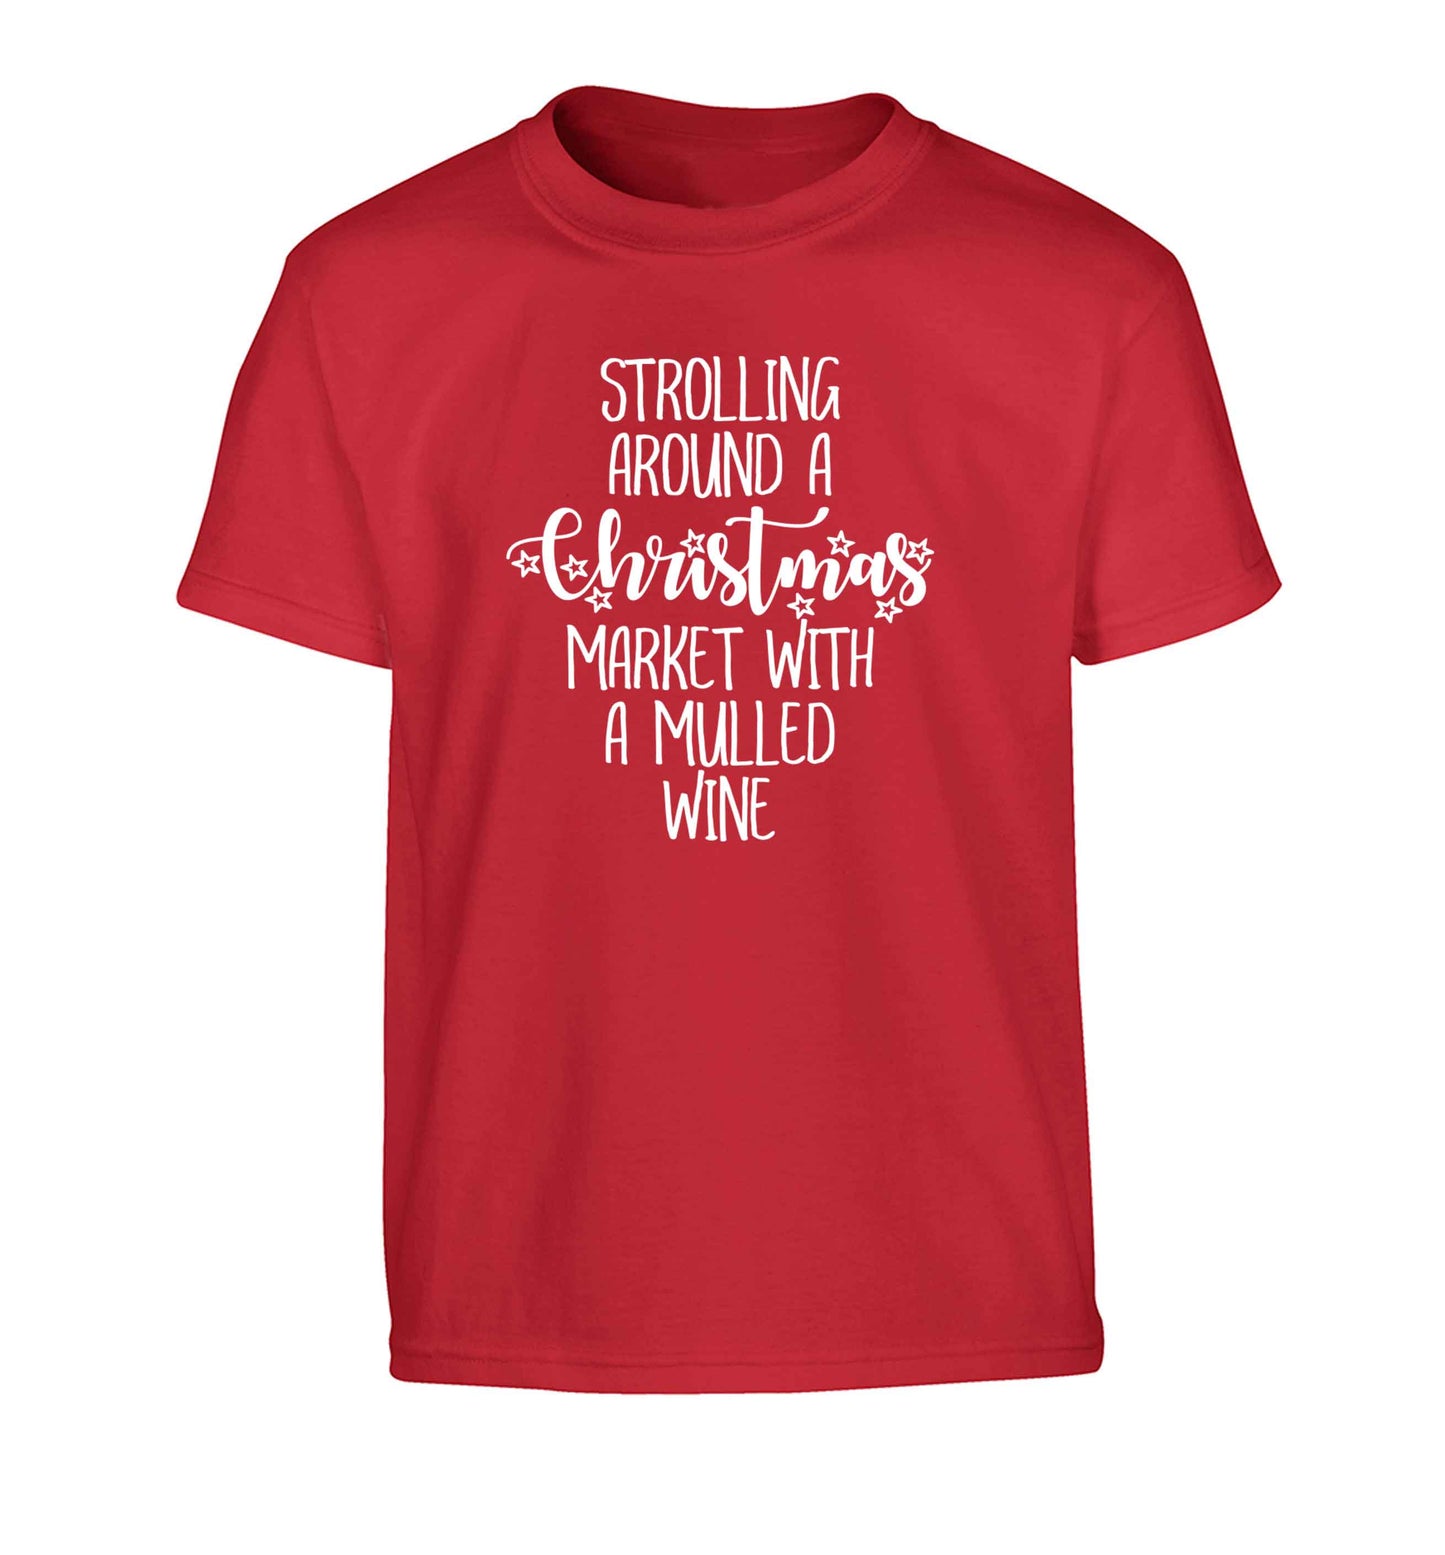 Strolling around a Christmas market with mulled wine Children's red Tshirt 12-13 Years